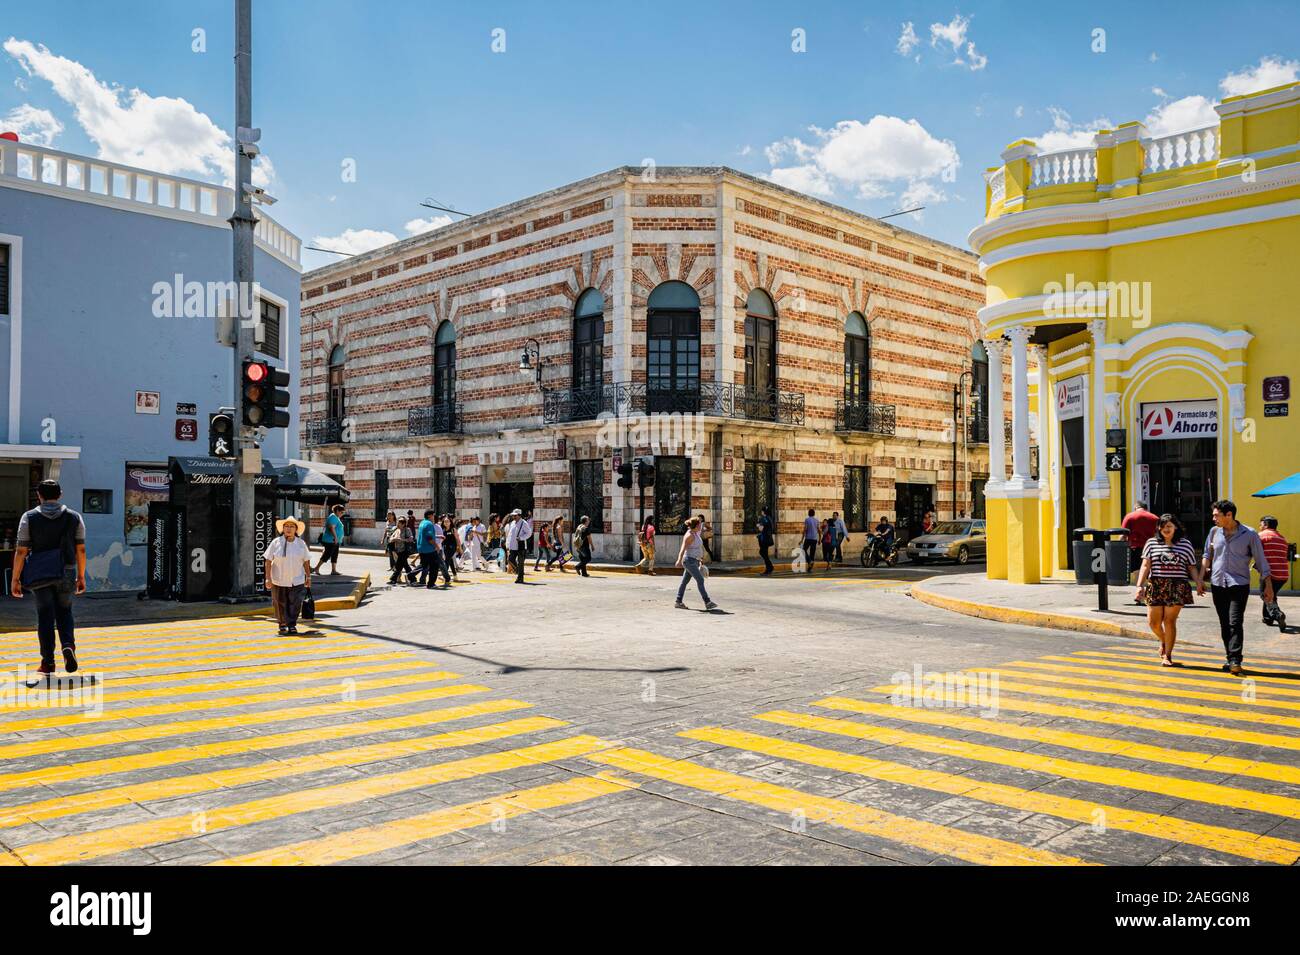 Merida, Yucatan, Mexico: people using the colourful zebra crossing surrounded by brightly painted colonial buildings in Merida city centre. Stock Photo